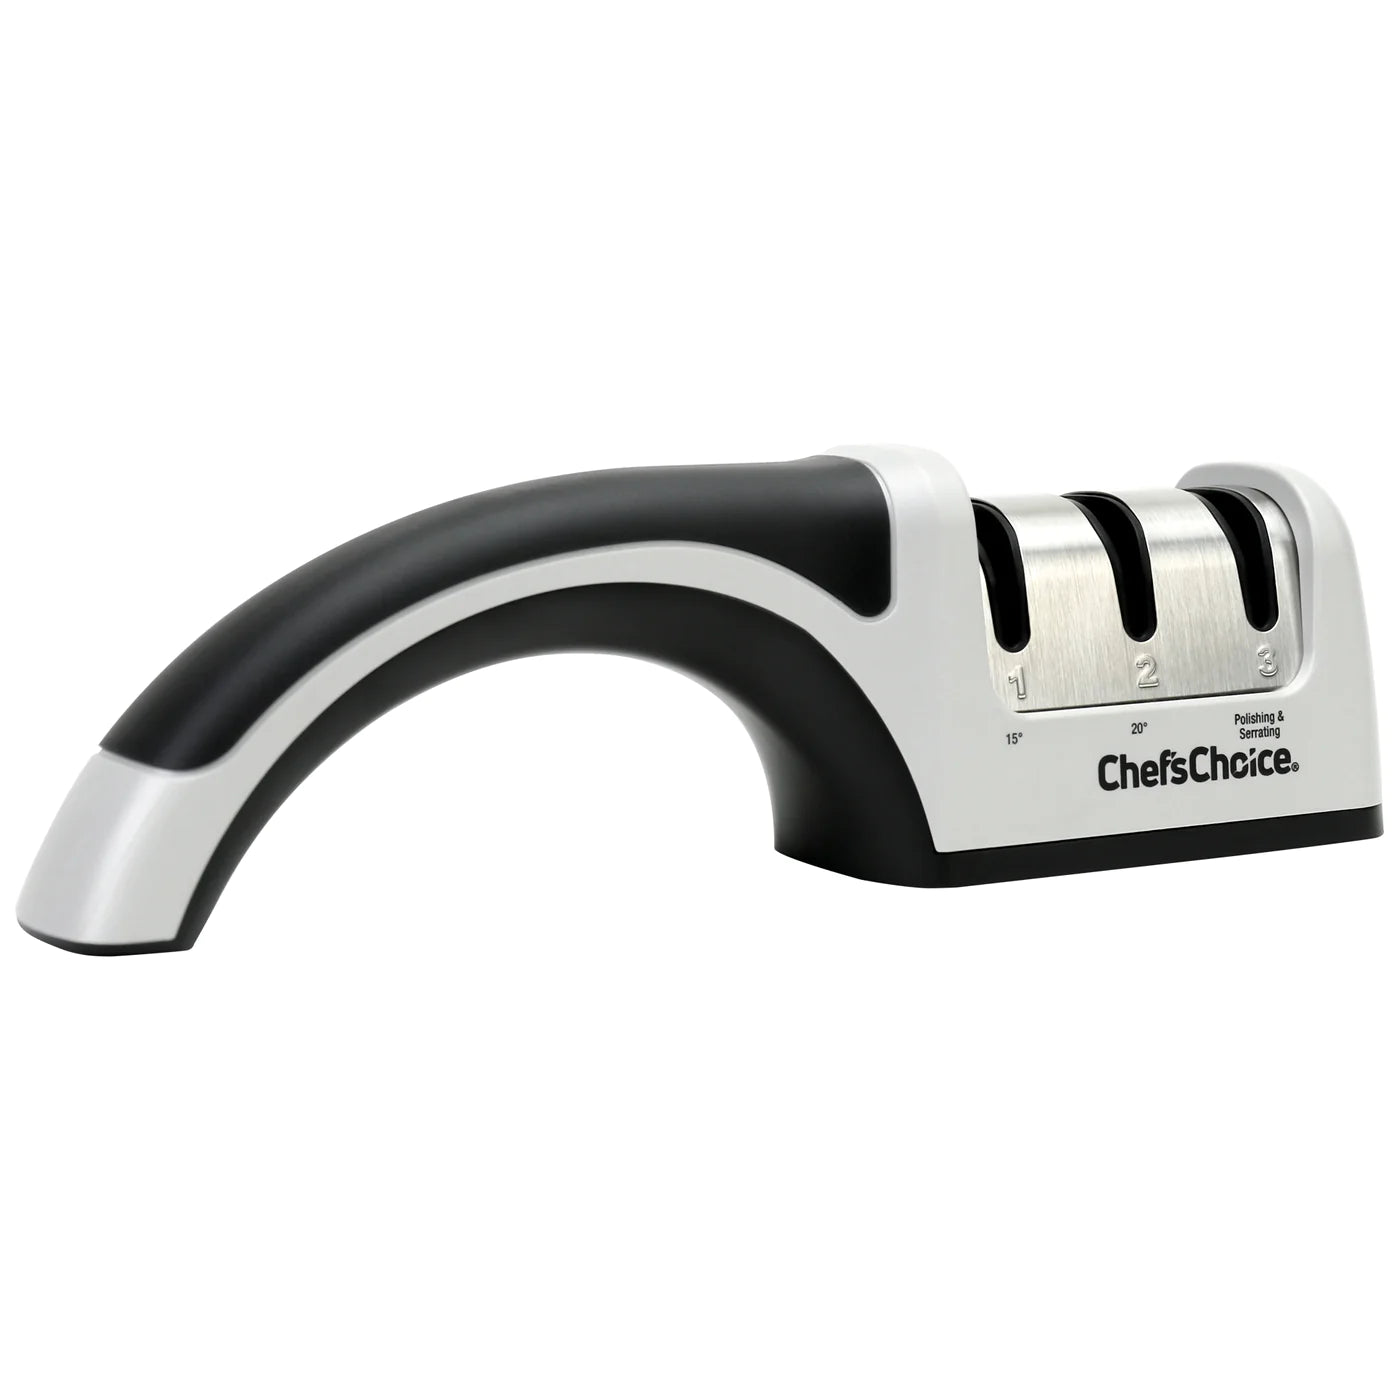 Chef'sChoice AngleSelect Professional Manual Knife Sharpener, in Silver/Black